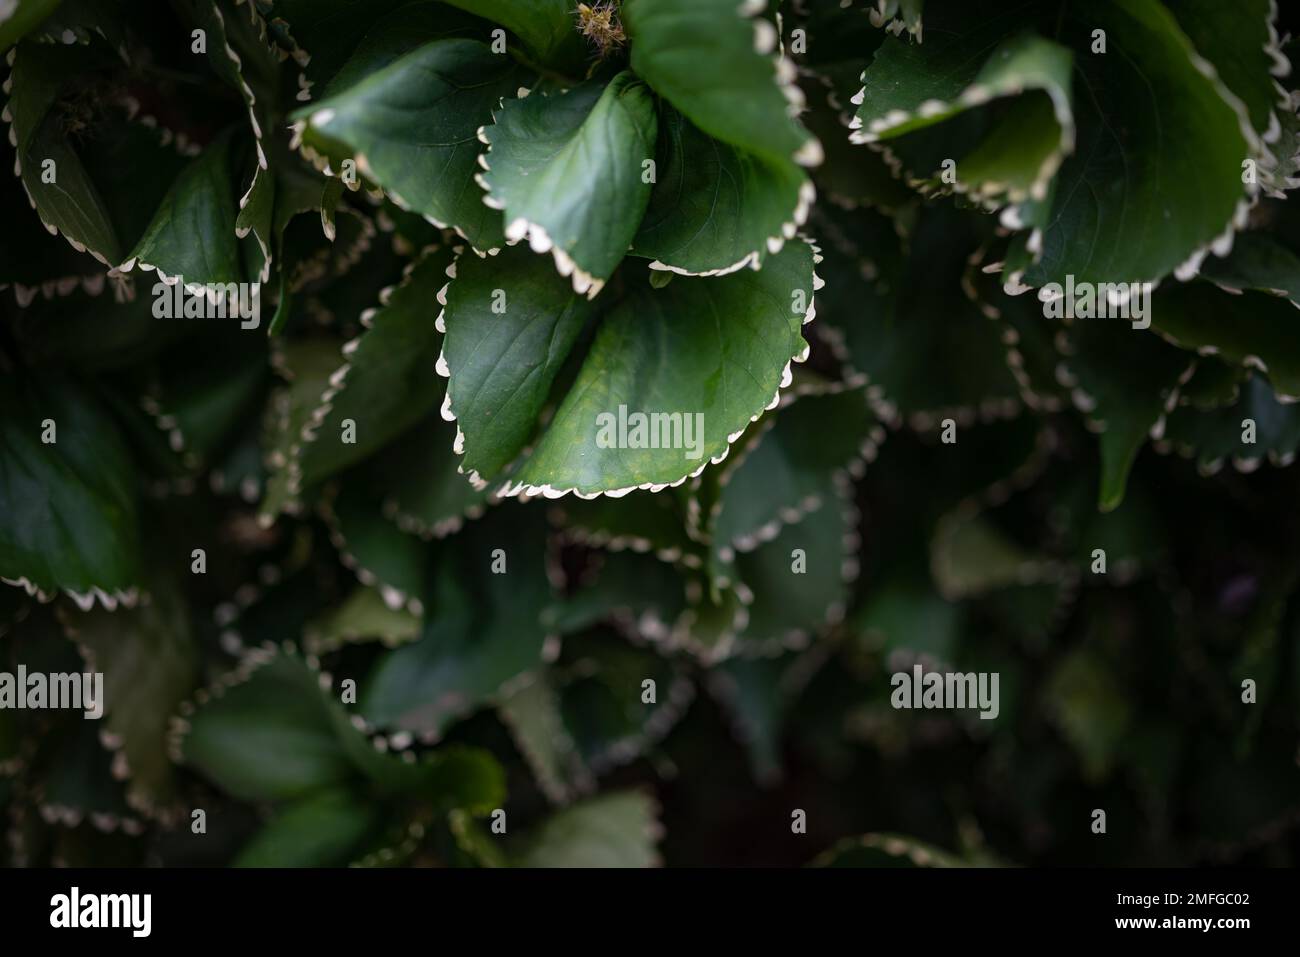 Mostly blurred unusual variety of Copper leaf plant with white toothed edges Stock Photo